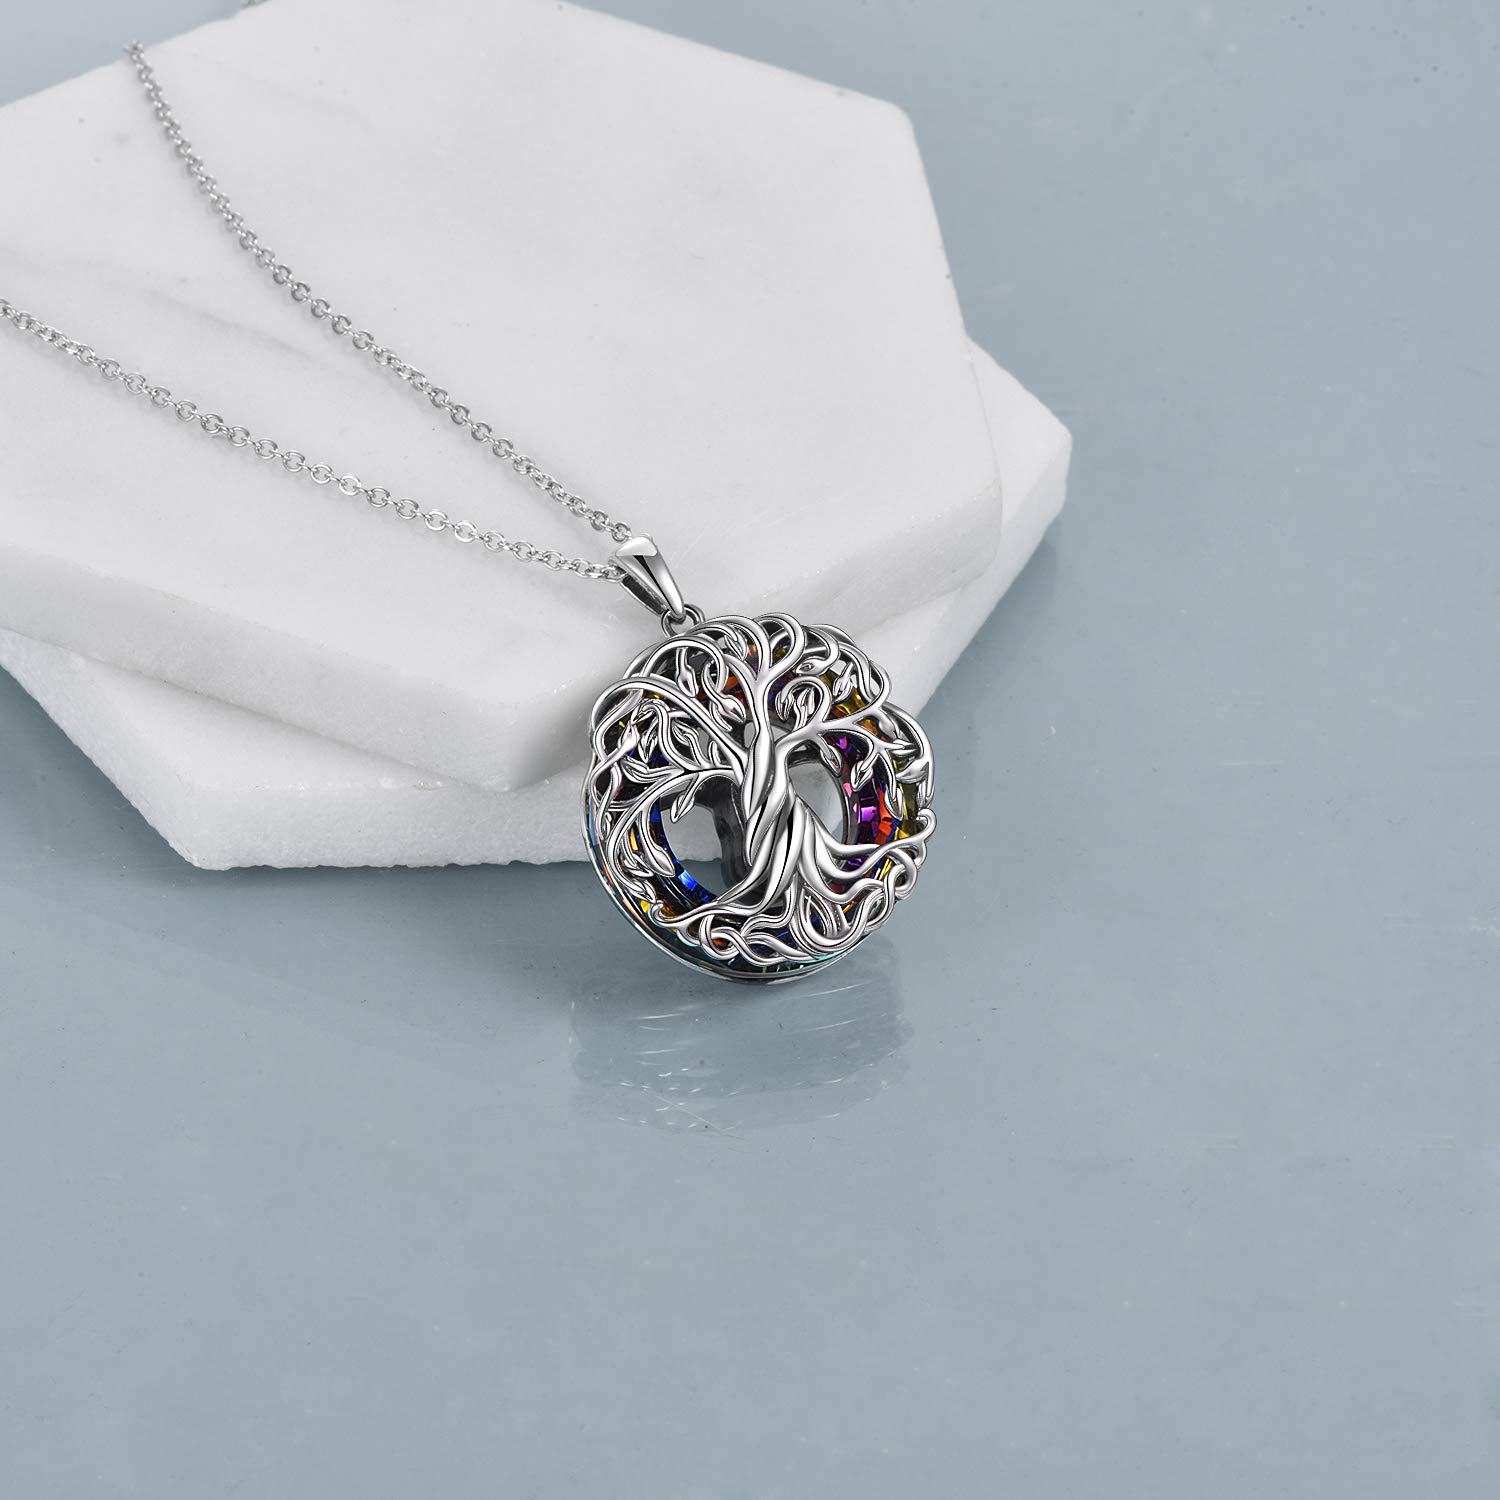 TOUPOP Cremation Jewelry s925 Sterling Silver Tree of Life Urn Necklace Keepsake Ashes Hair Memorial Locket with Circle Crystal w/Funnel Filler for Women Girls Friends